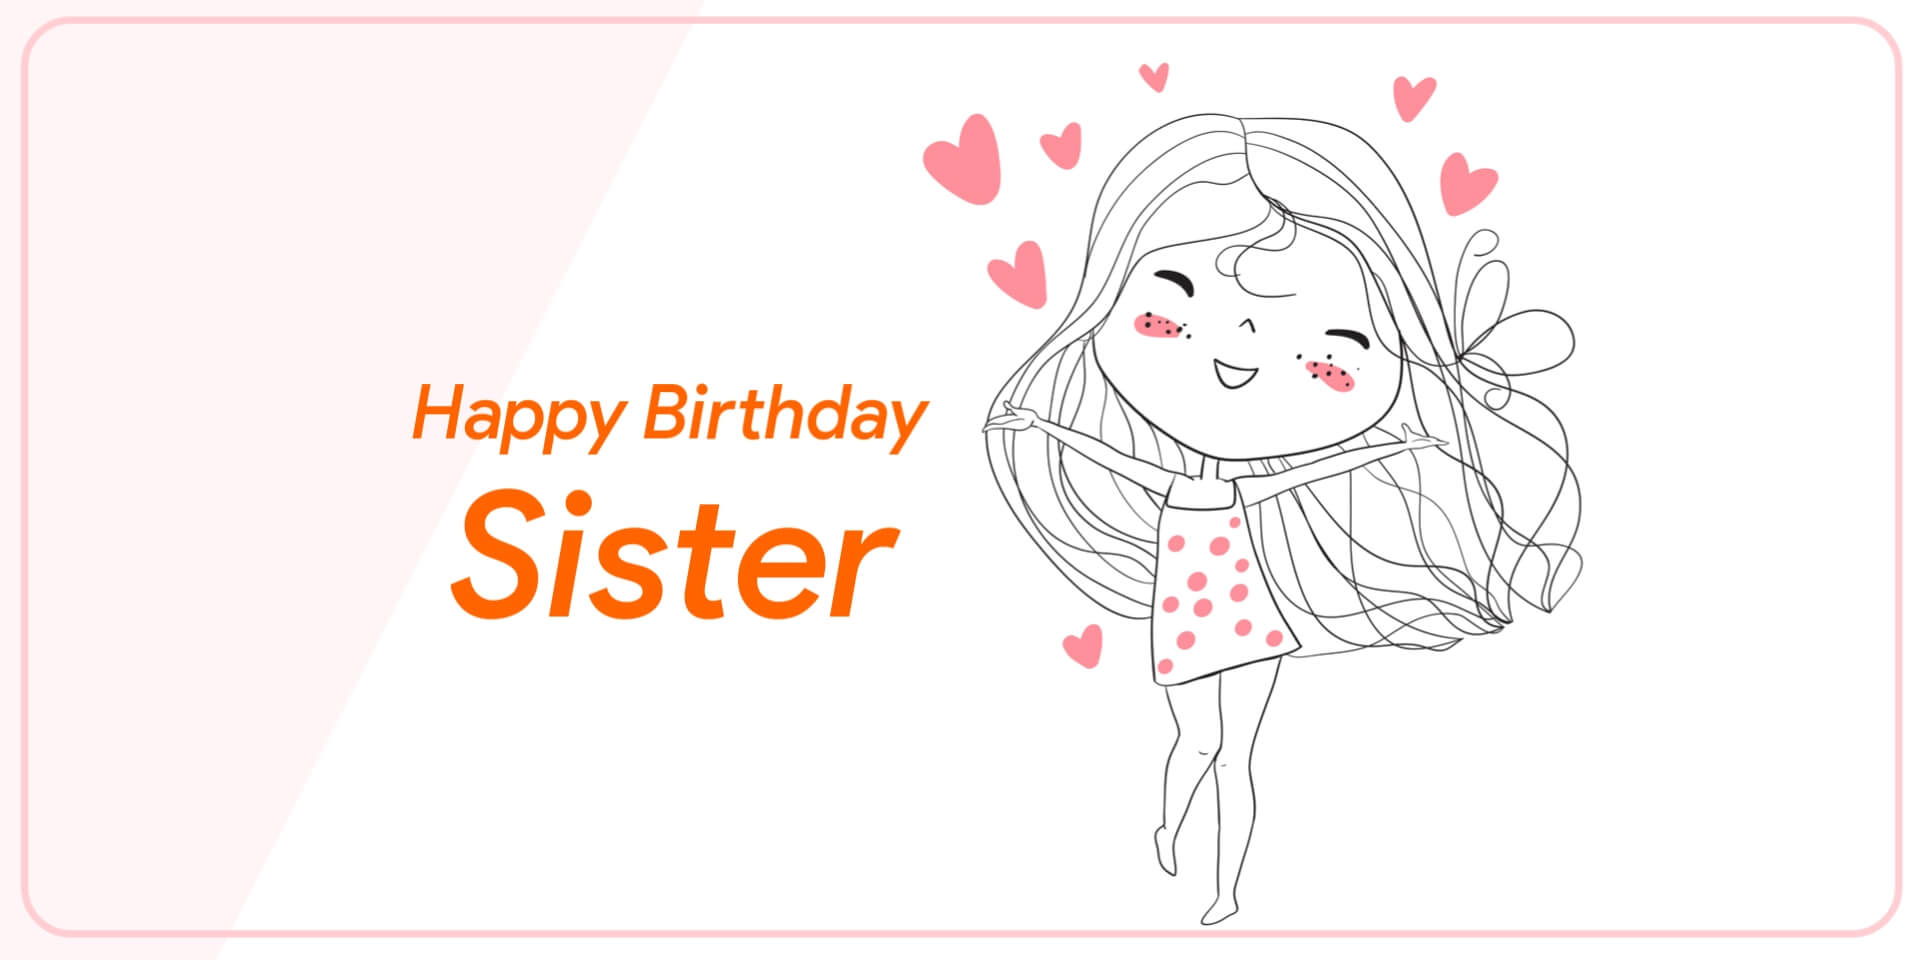 95+ Best Happy Birthday Wishes and Messages for your Sister